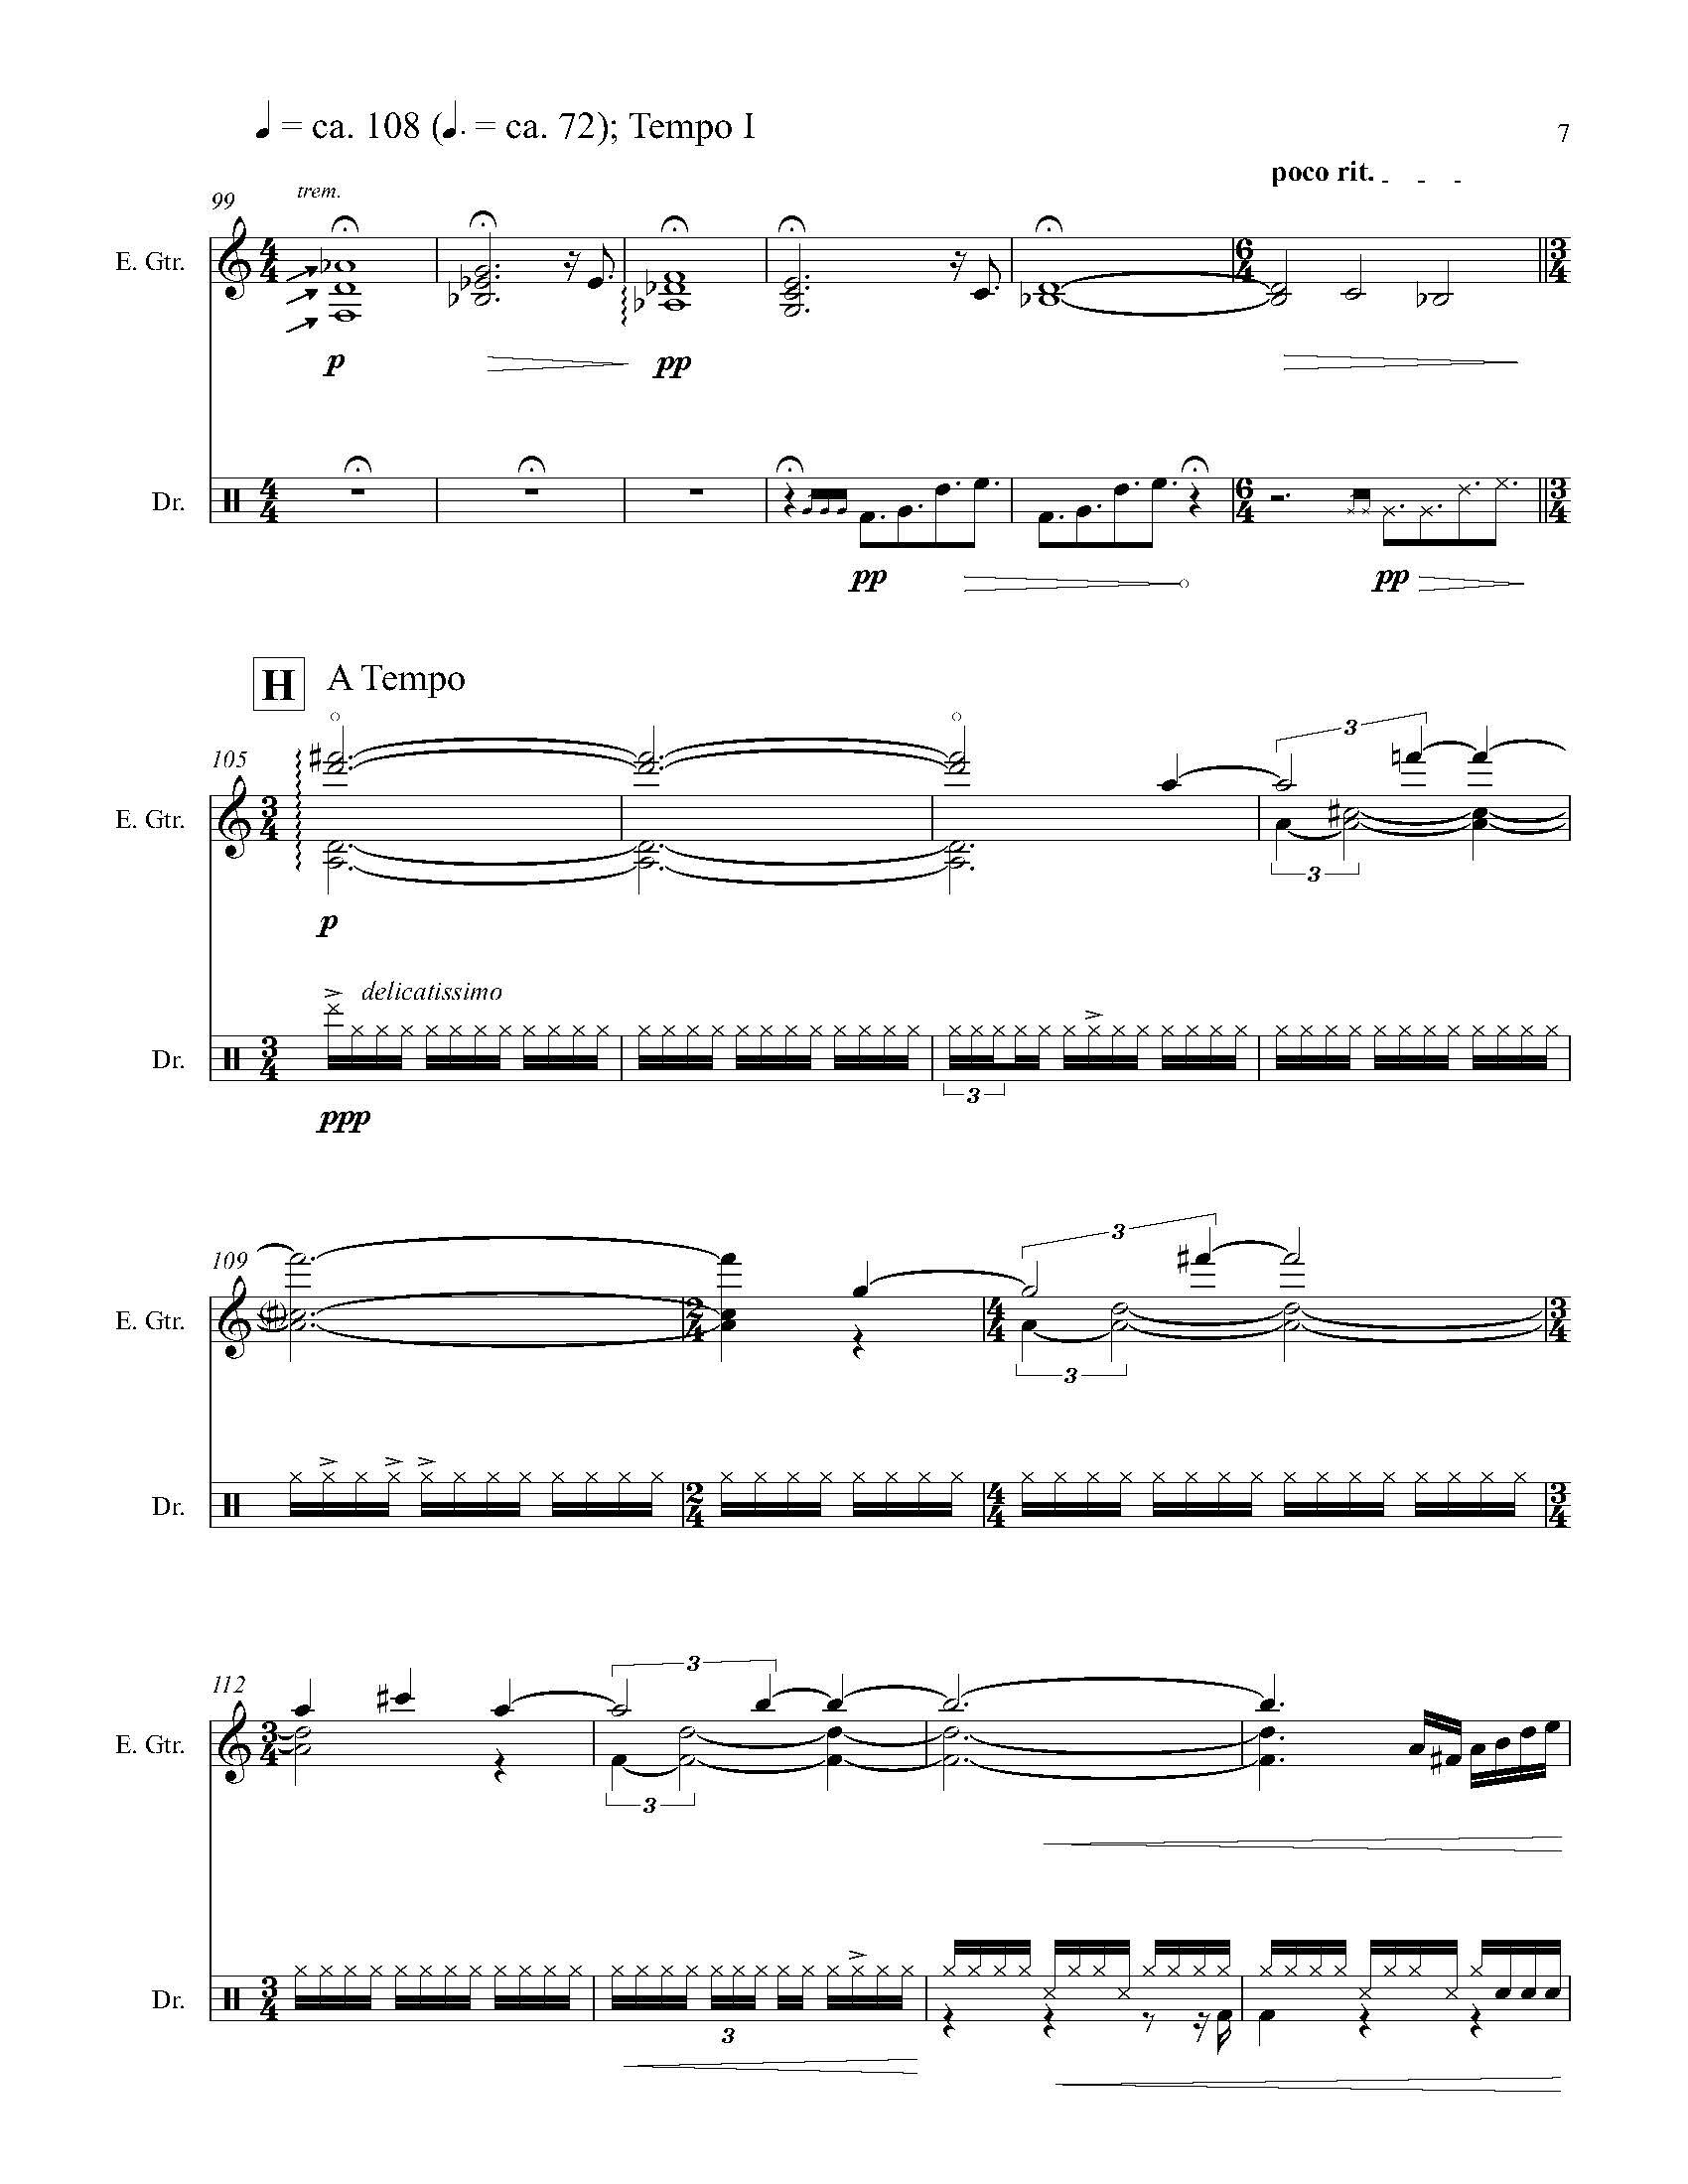 Atoms - Complete Score_Page_13.jpg